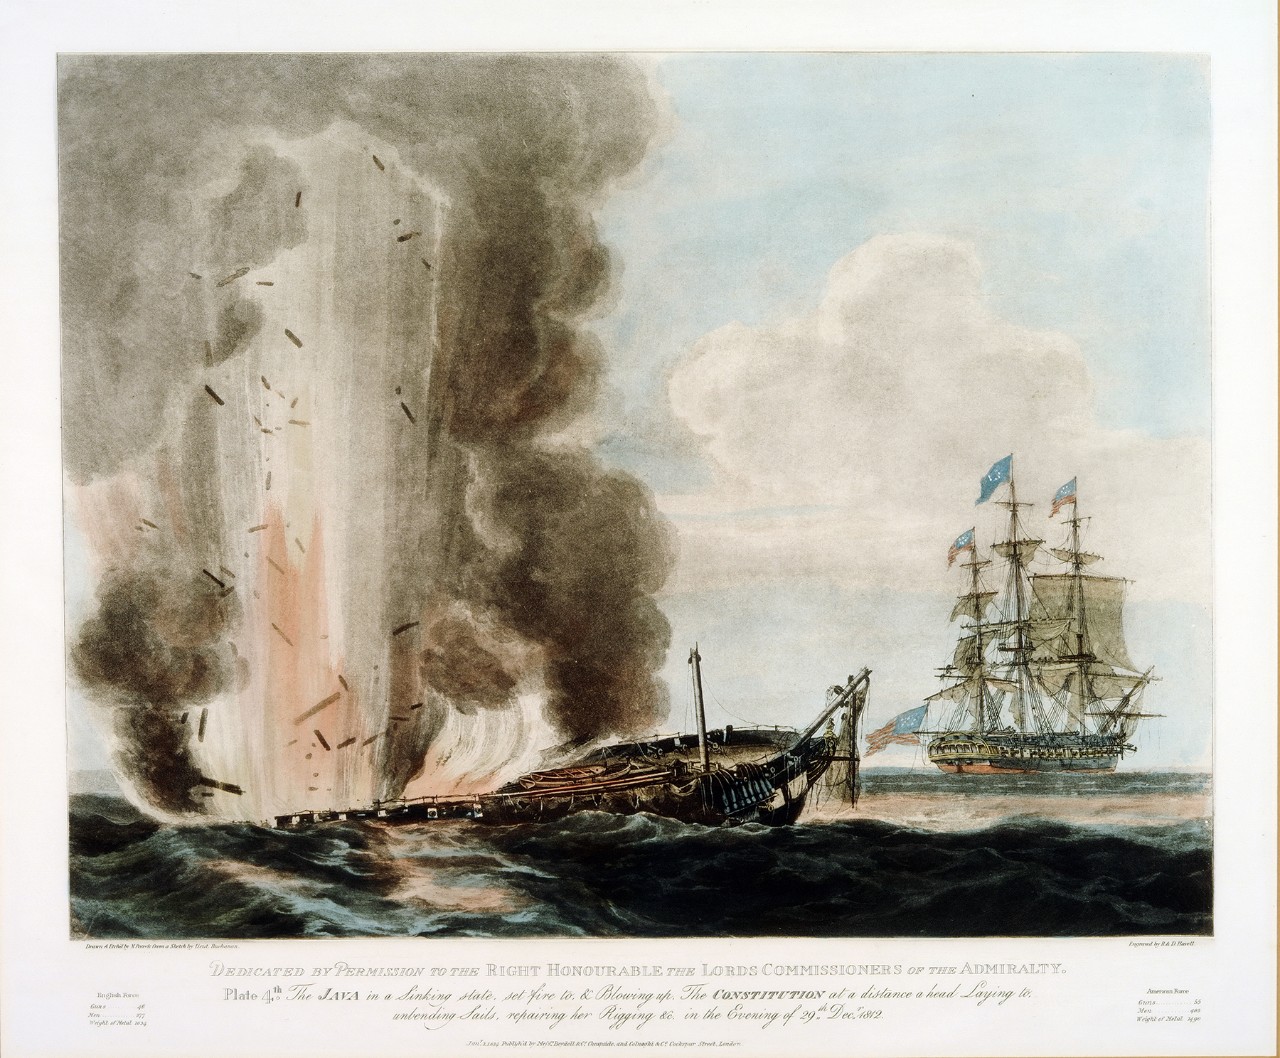 To the left, the British ship is exploding as it sinks, the American ship is in the background